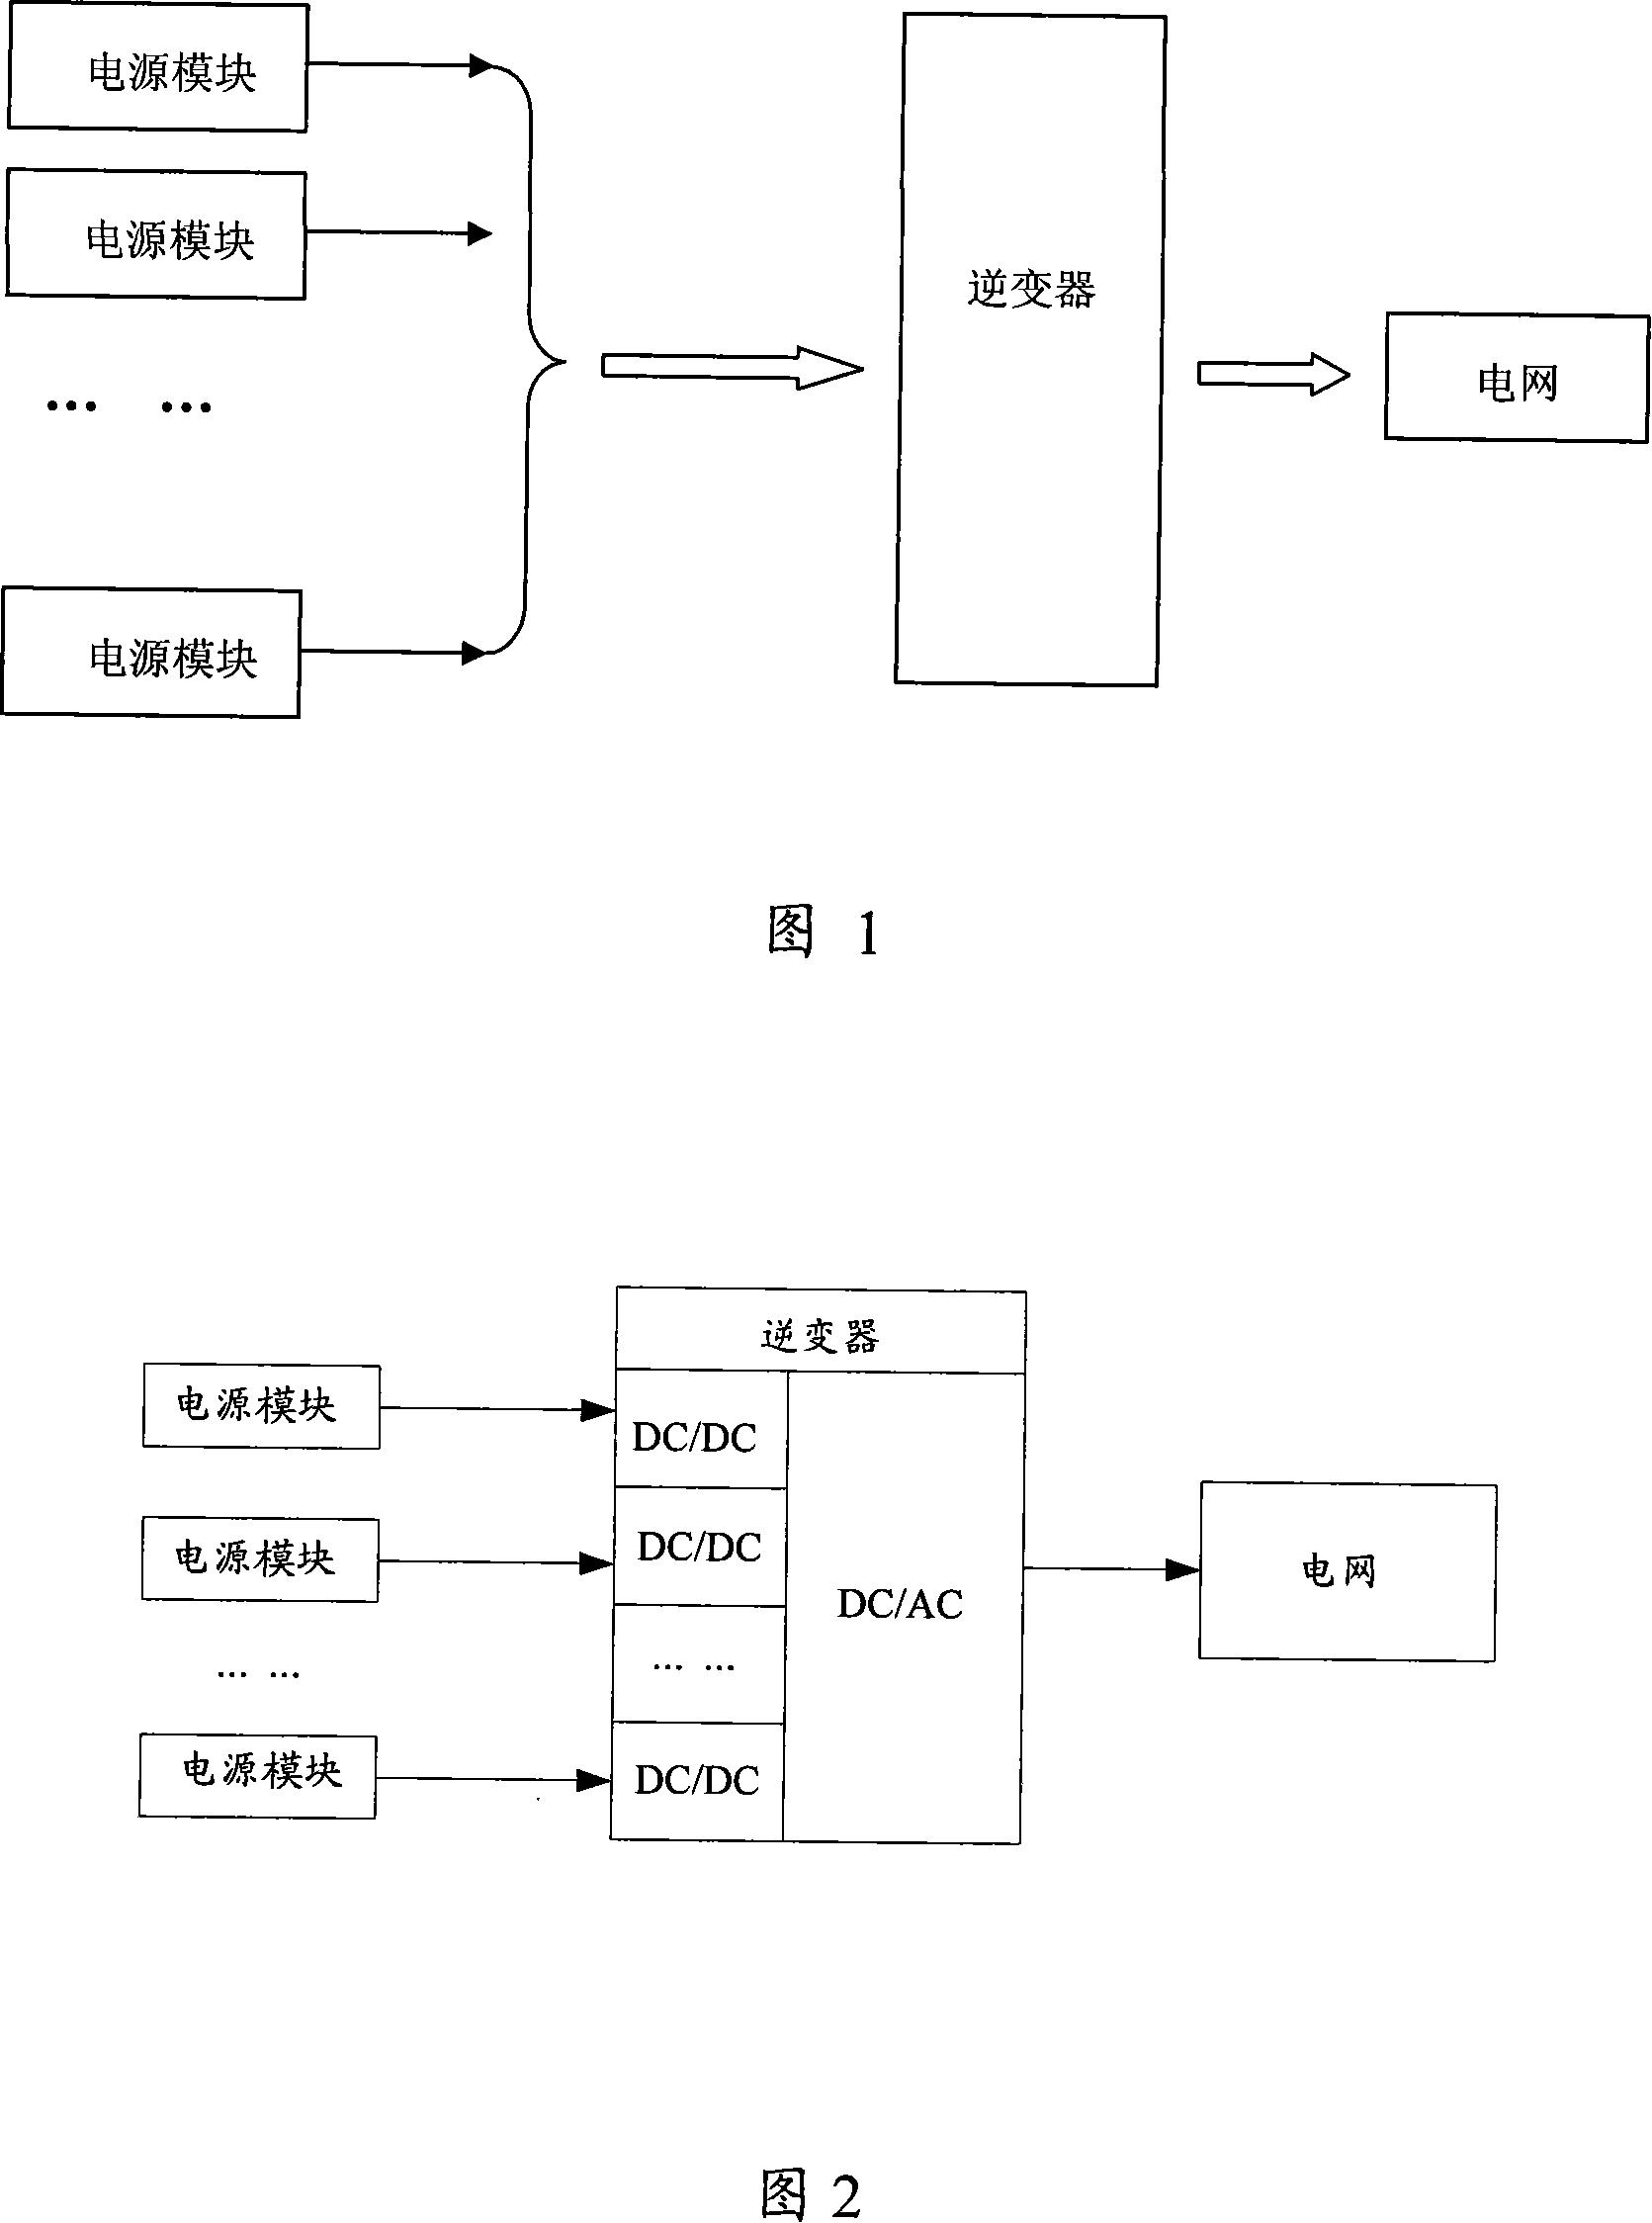 Wide-region energy feedback method for multi-output switch power source and its implementing circuit